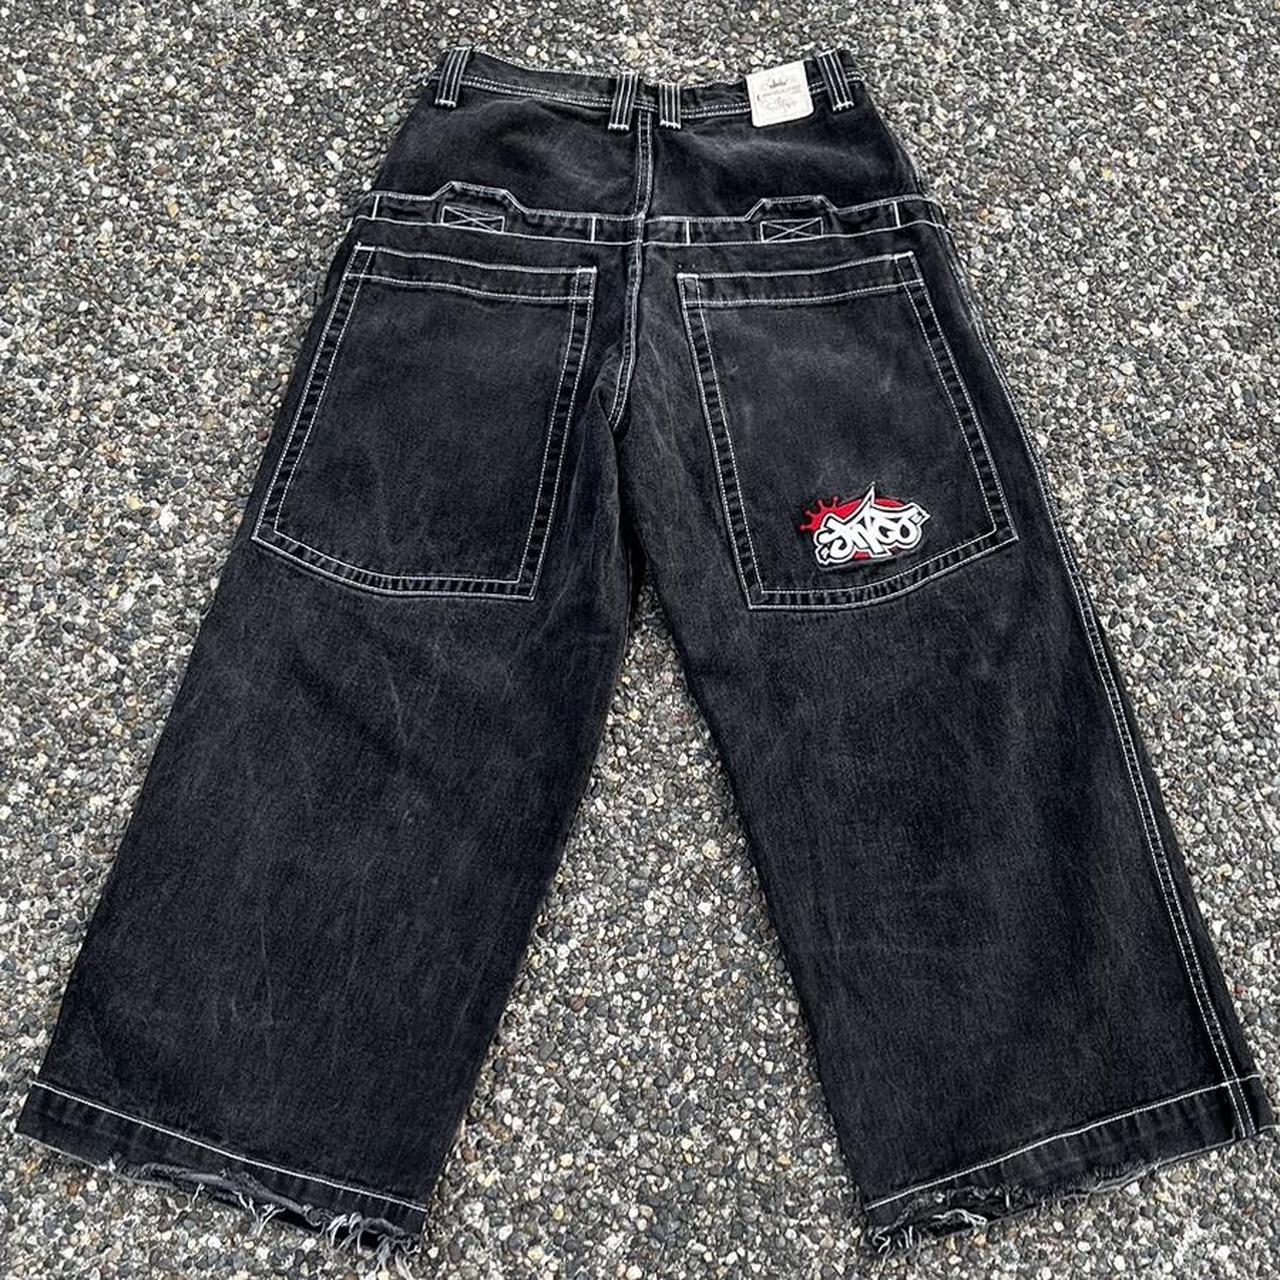 Vintage JNCO jeans low pockets with snail Jnco spell... - Depop